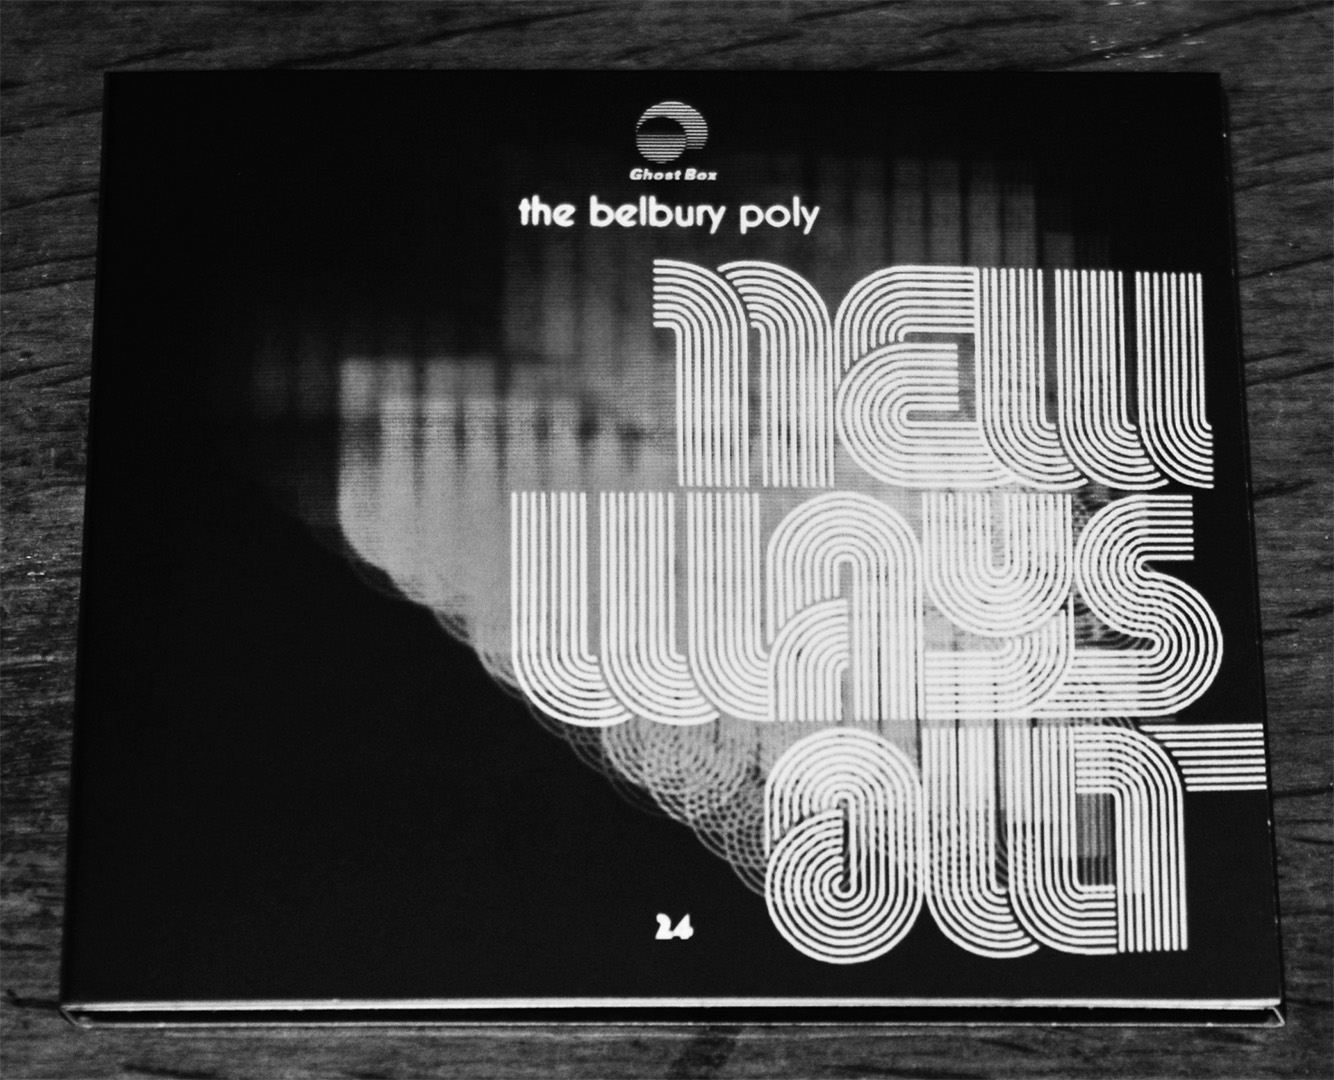 The Belbury Poly-New Ways Out-Ghost Box Records-Jim Jupp-A Year In The Country